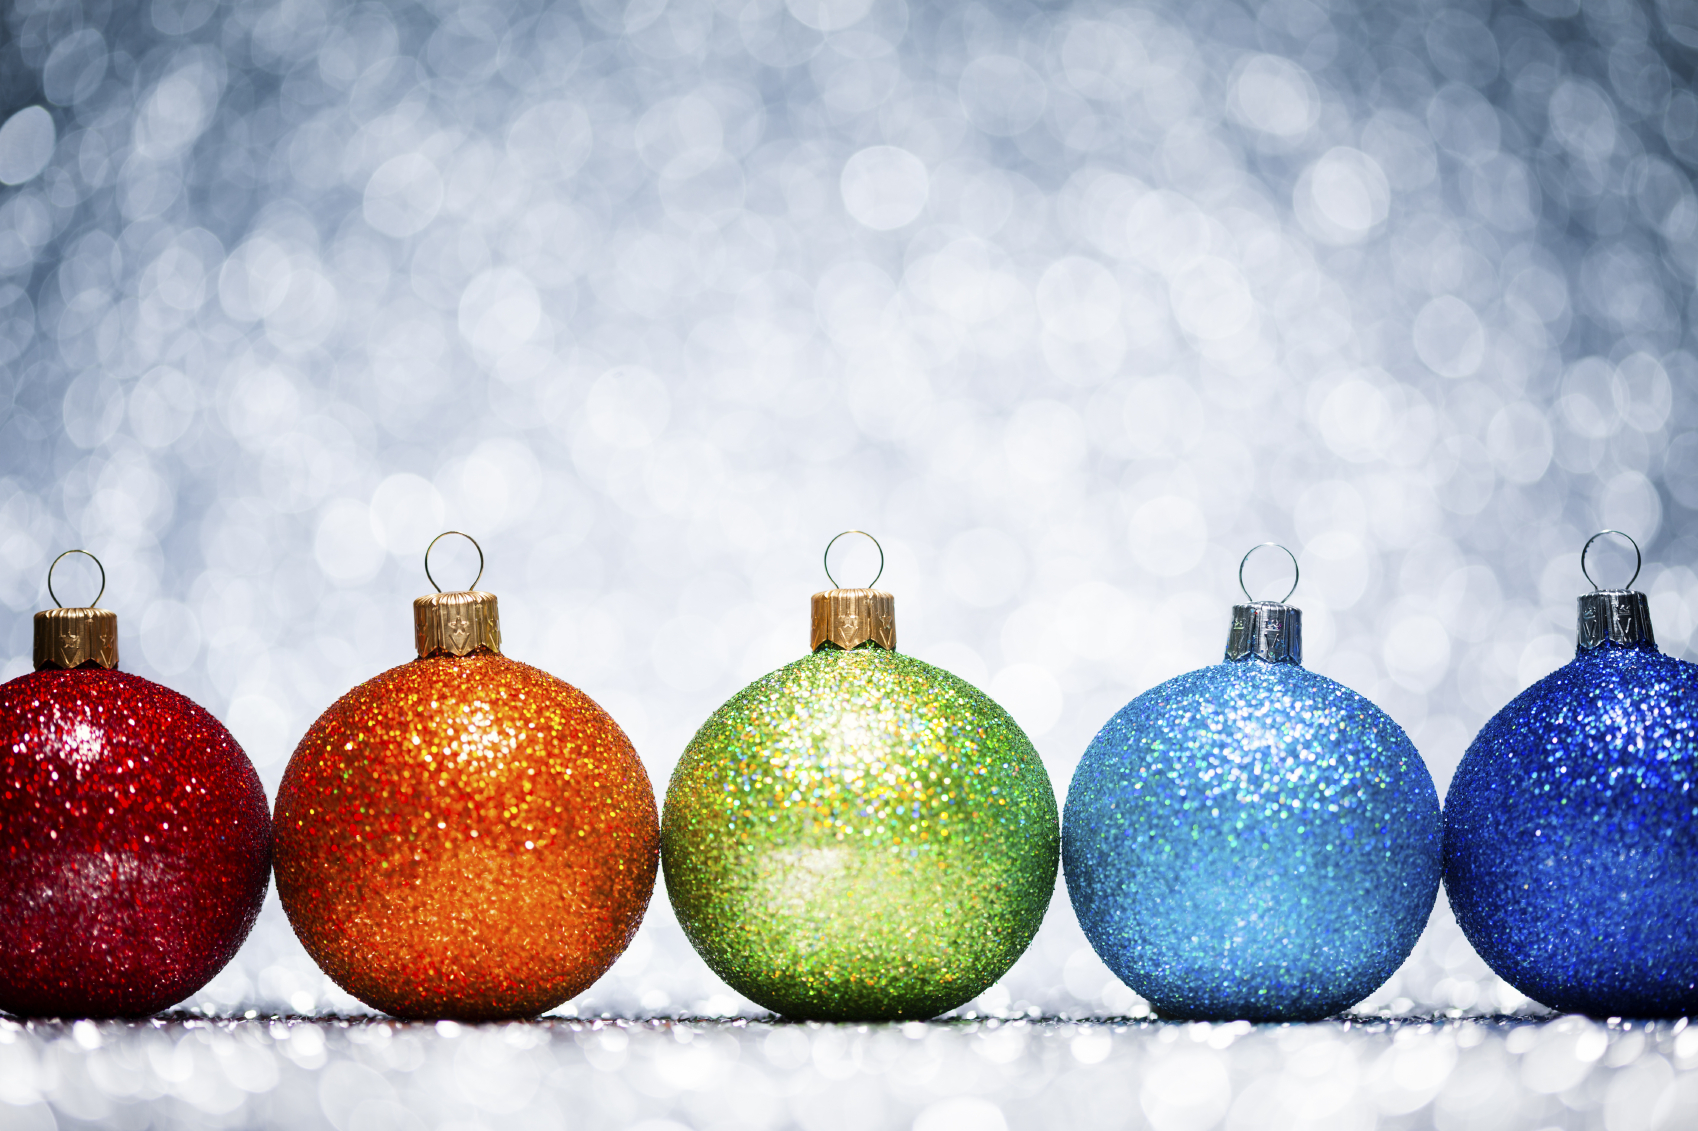 Make This Holiday Season Brighter: A Rainbow of Possibilities for Your Senior Loved Ones